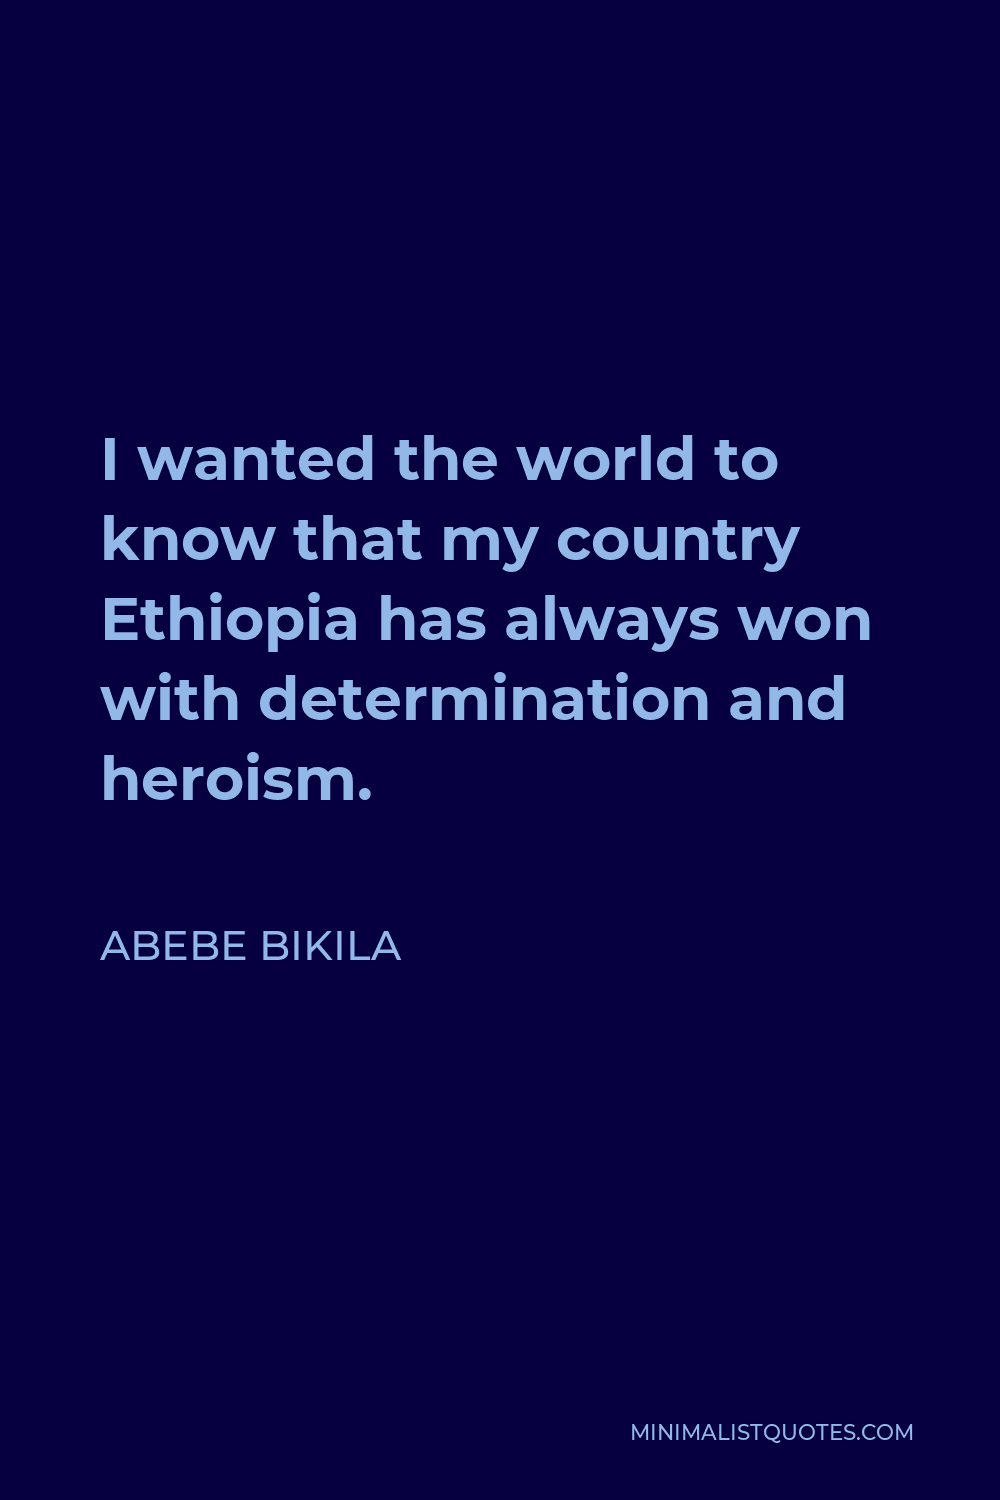 Abebe Bikila Quote - I wanted the world to know that my country Ethiopia has always won with determination and heroism.